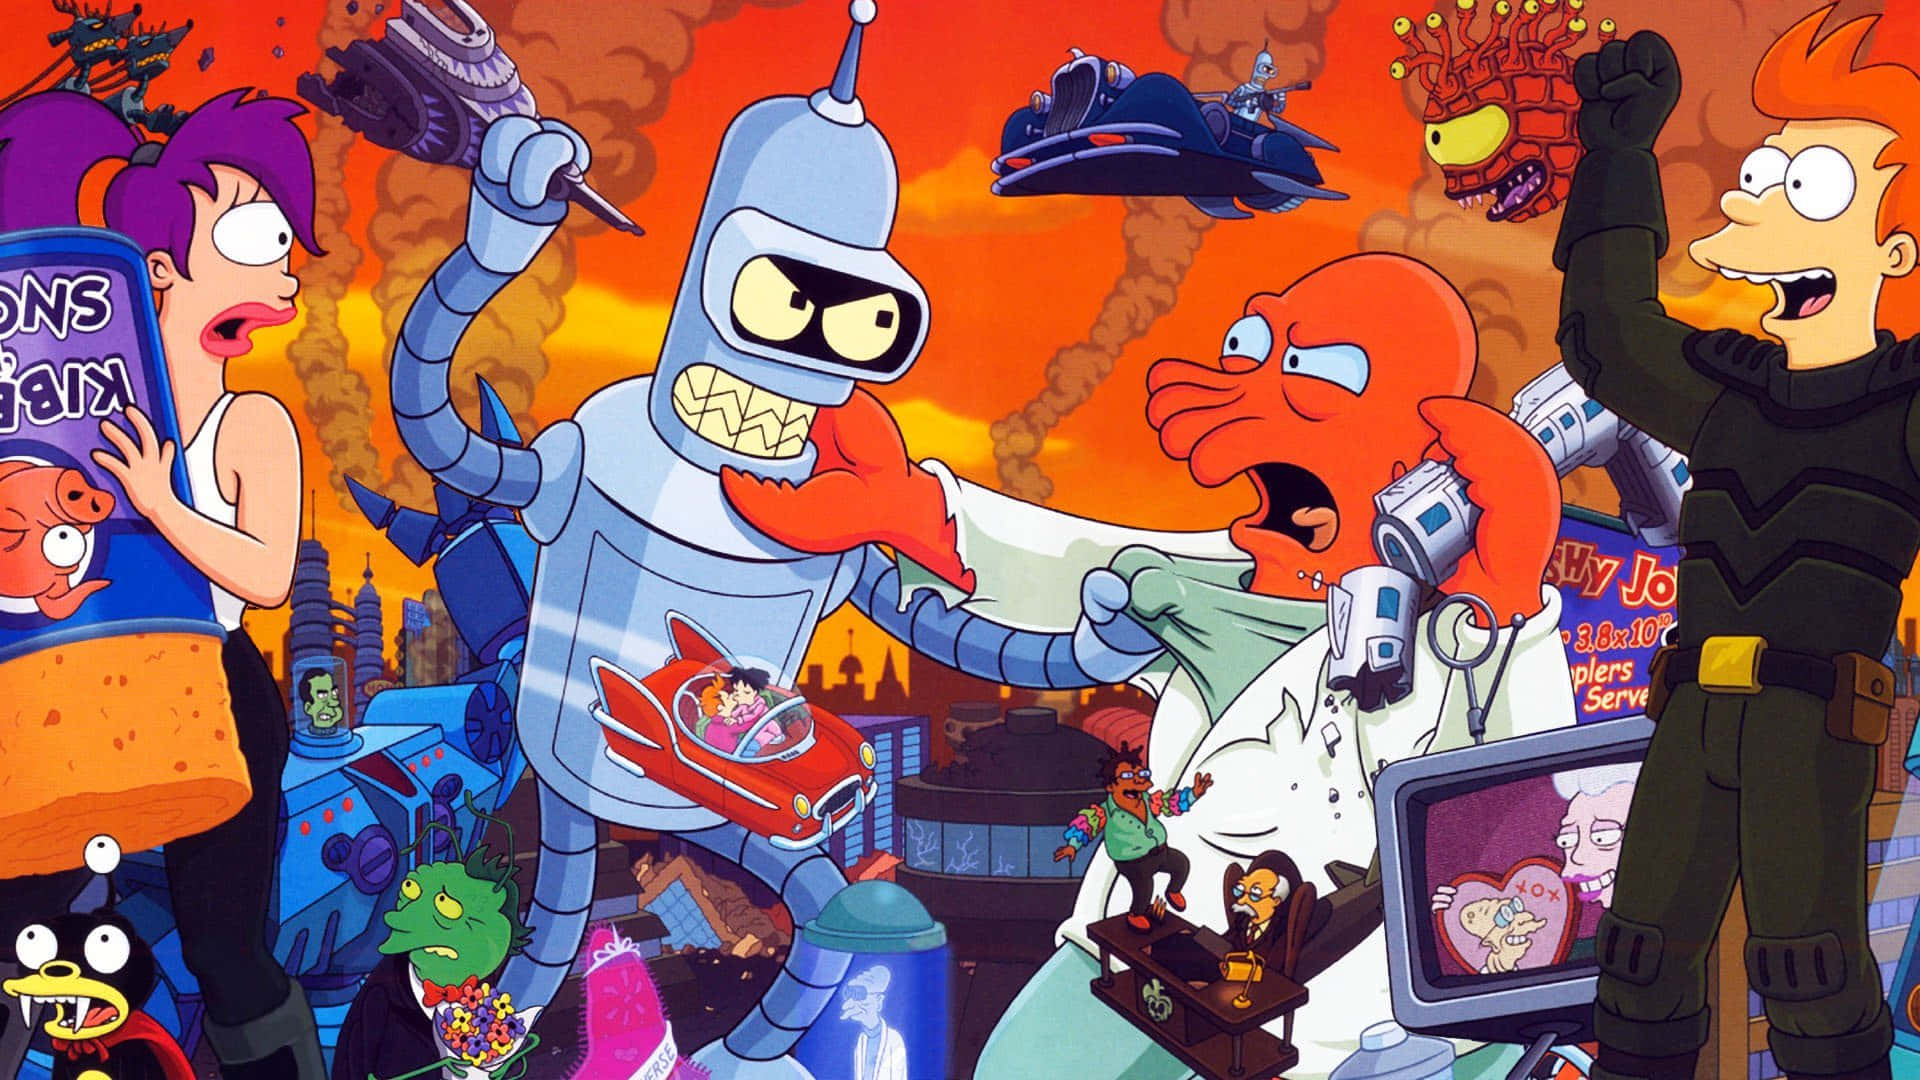 Futurama's Planet Express Crew in Action